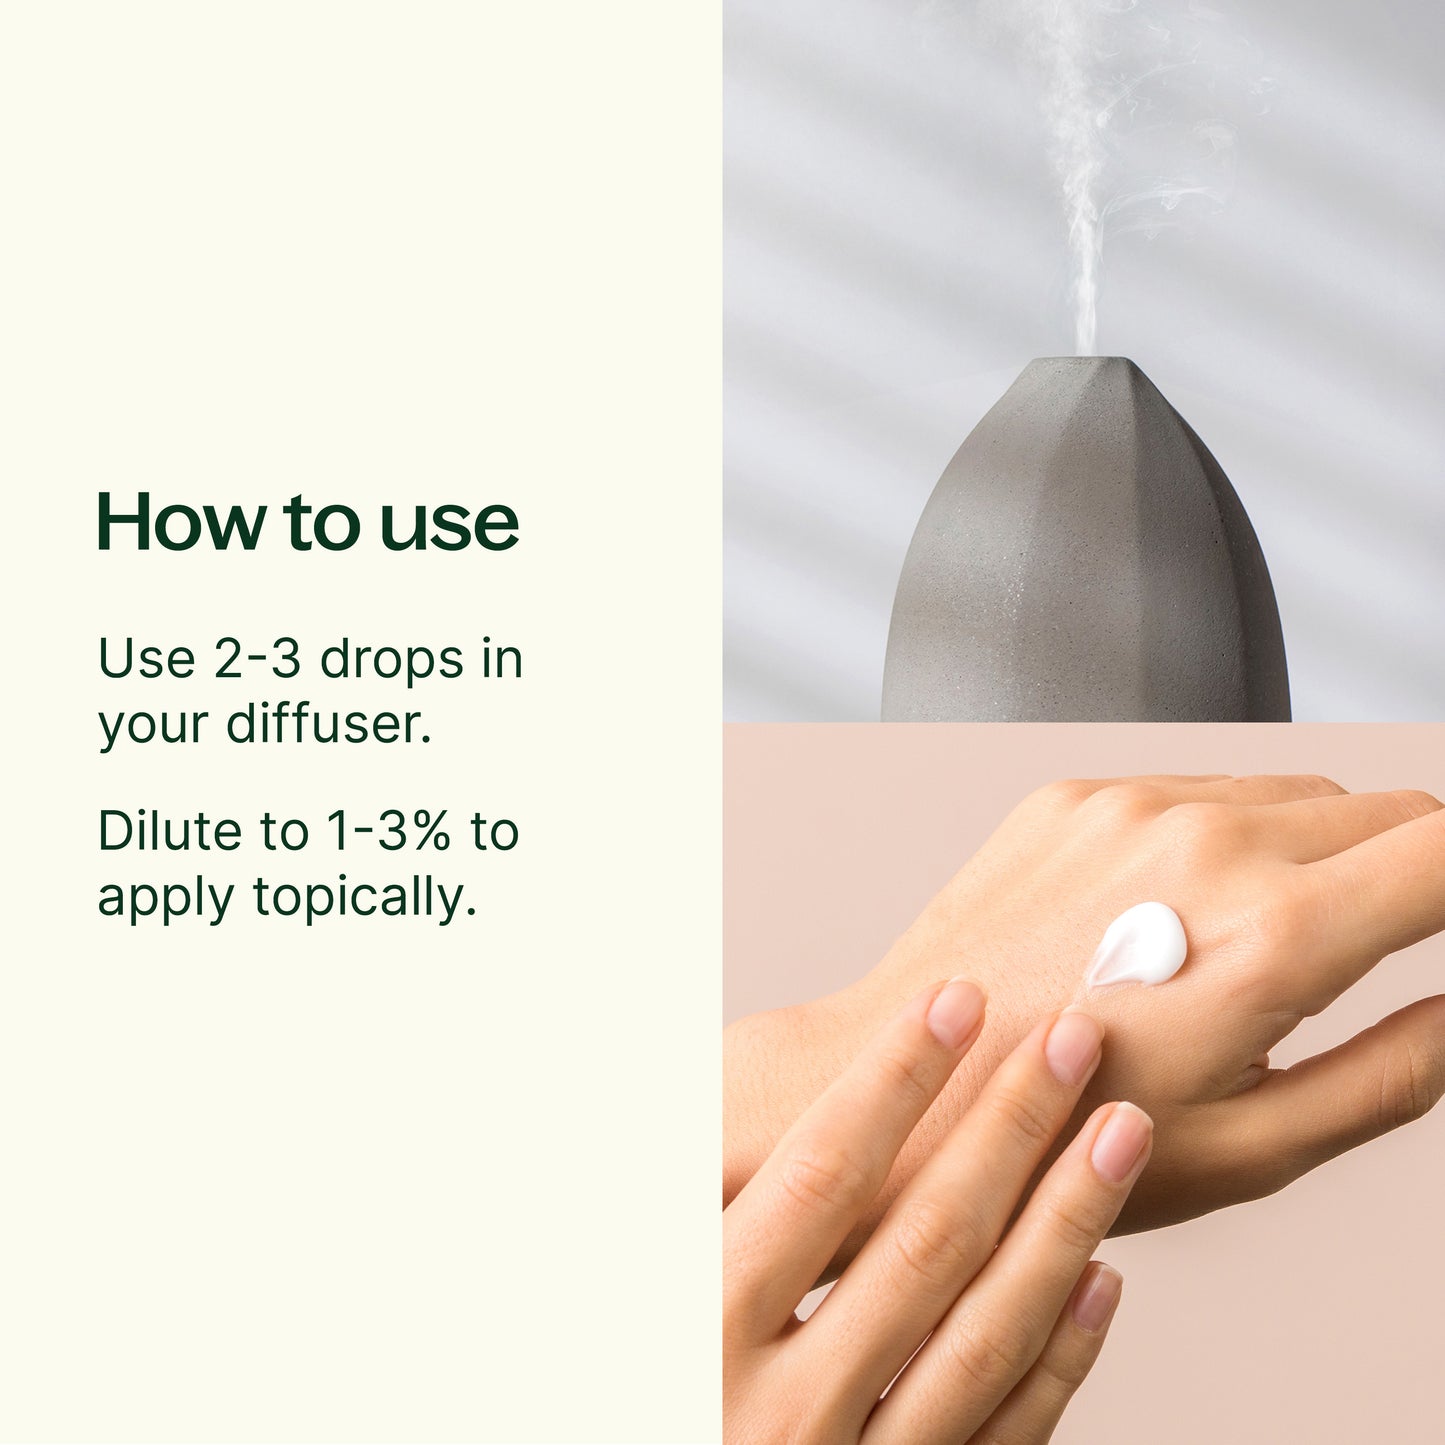 How to Use Tummy All Better KidSafe Essential Oil: Use 2-3 drops in your diffuser. Or Dilute to 1-3% to apply topically.